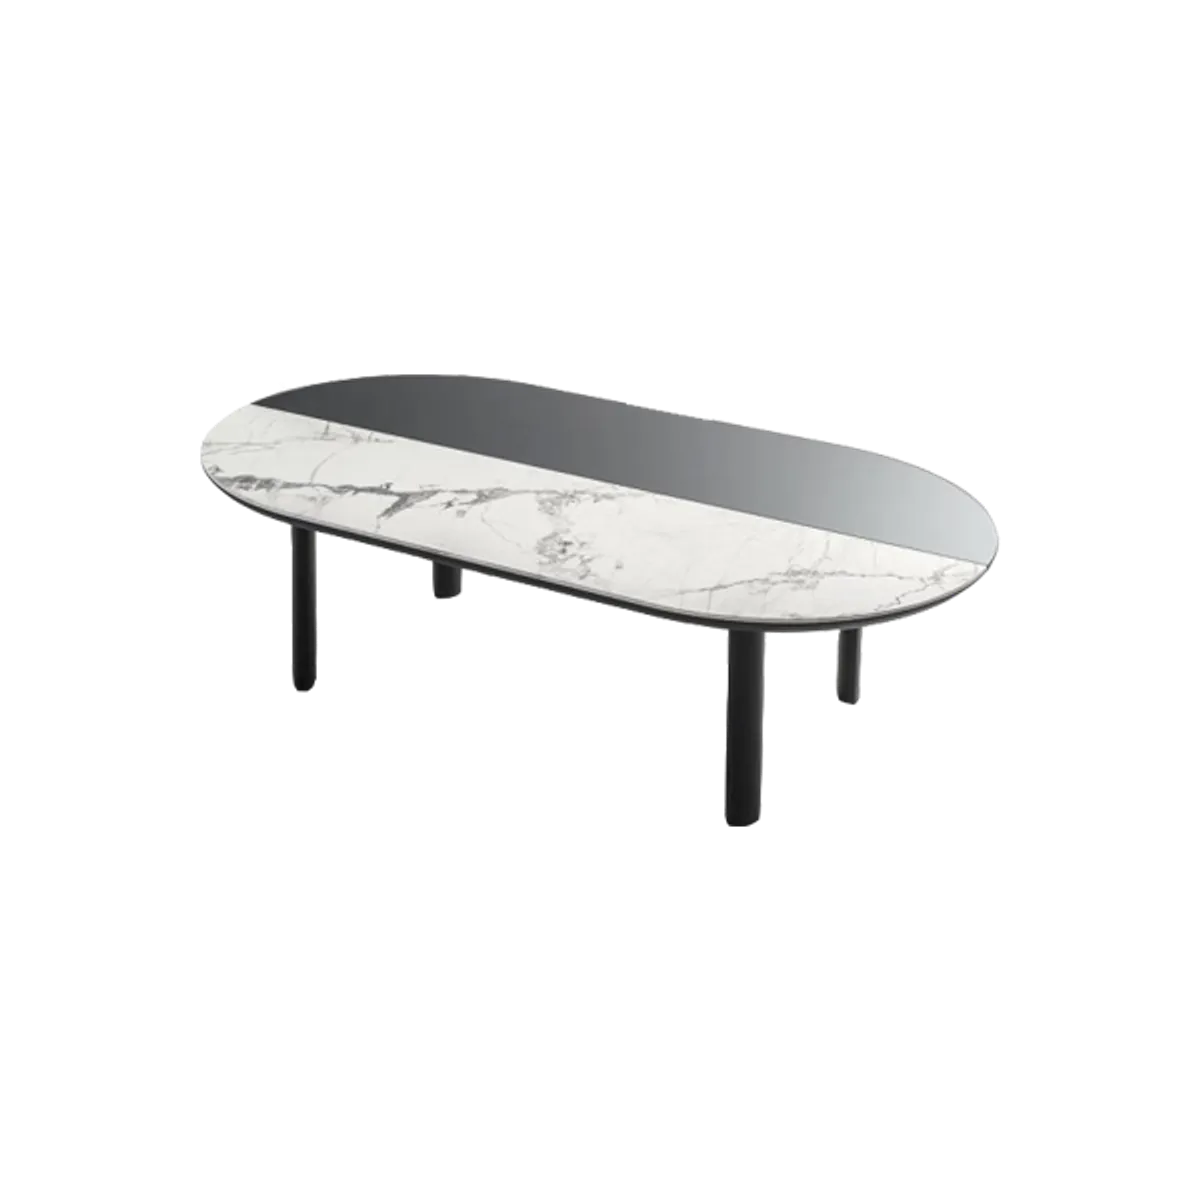 Bam oval table - Inside Out Contracts1